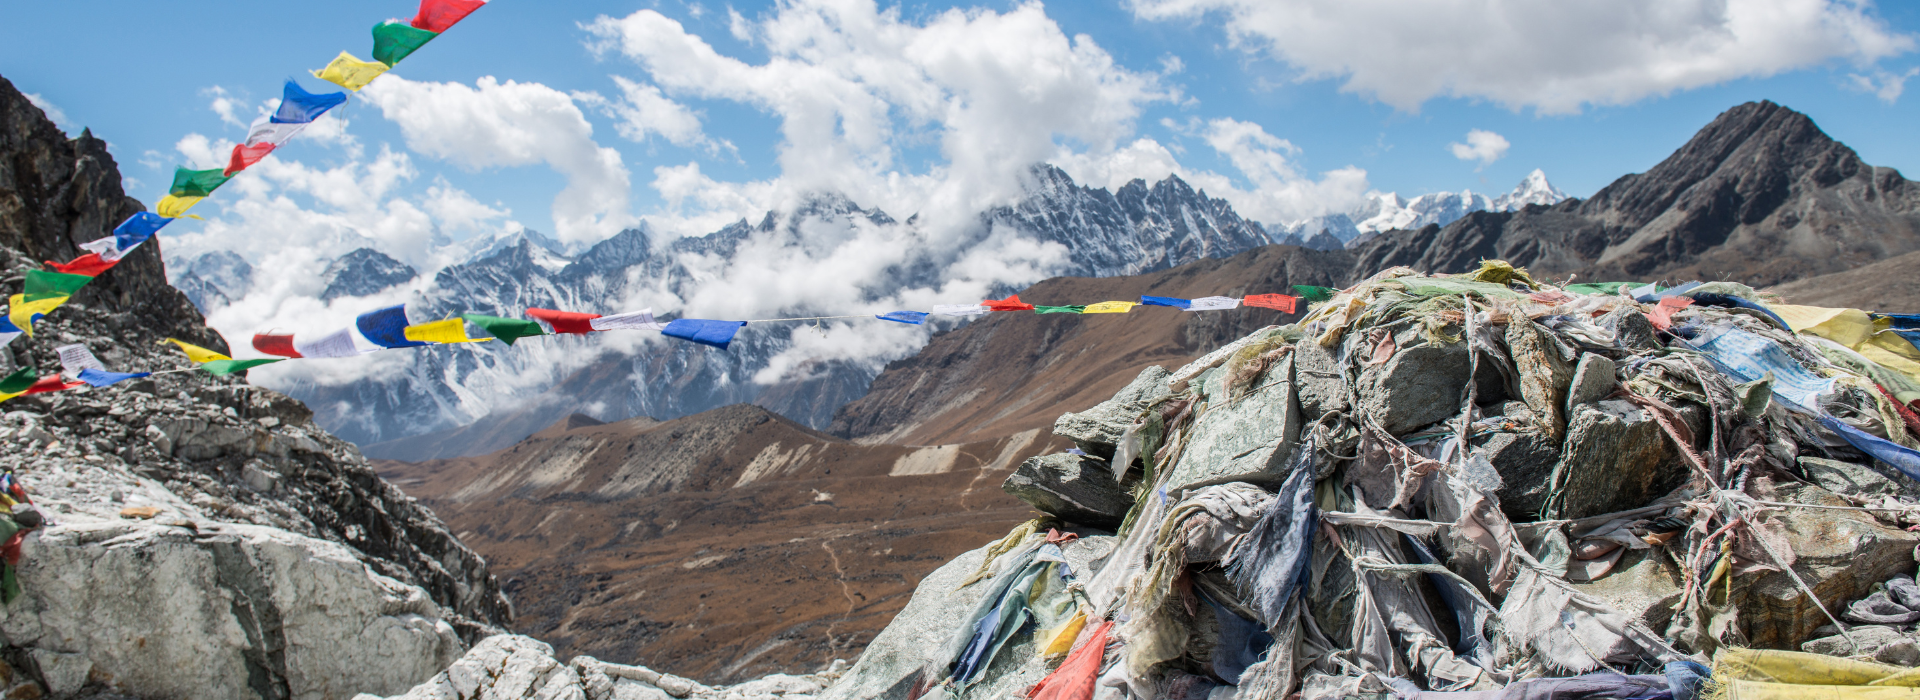 View of colourful flags from Cho La Pass, Nepal